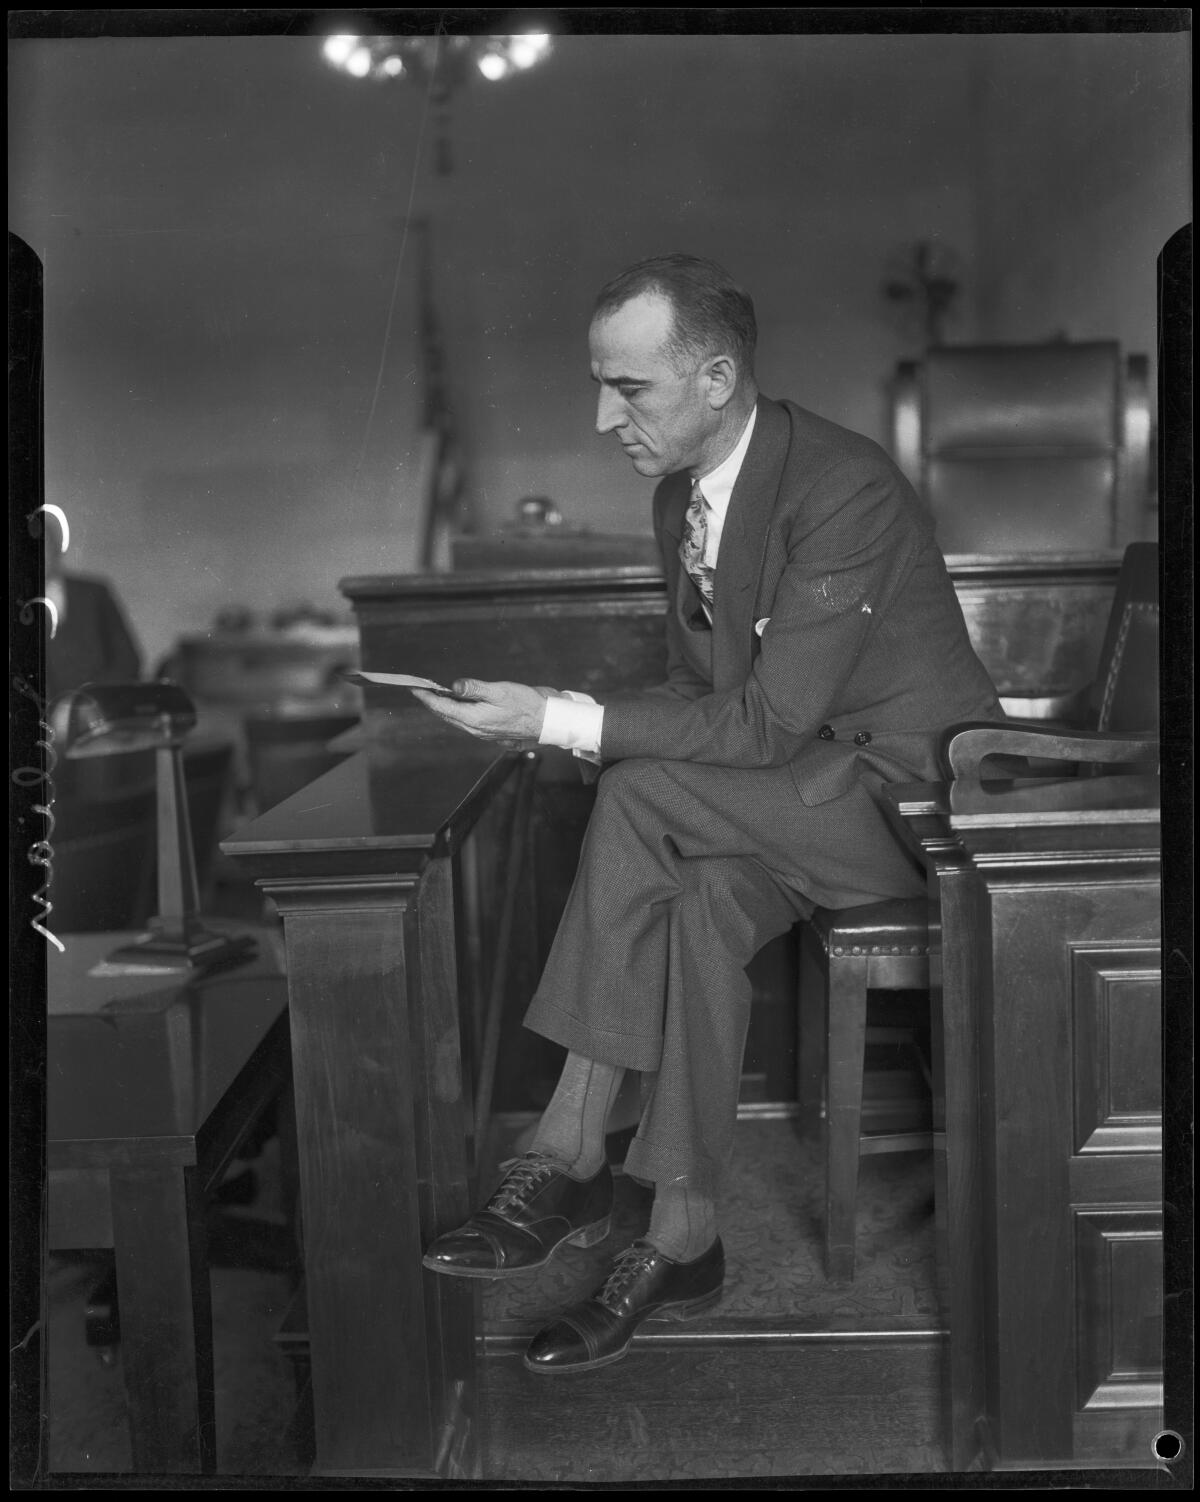 C.C. Julian, L.A. oilman, in a dark suit in a courtroom. Black and white archival image